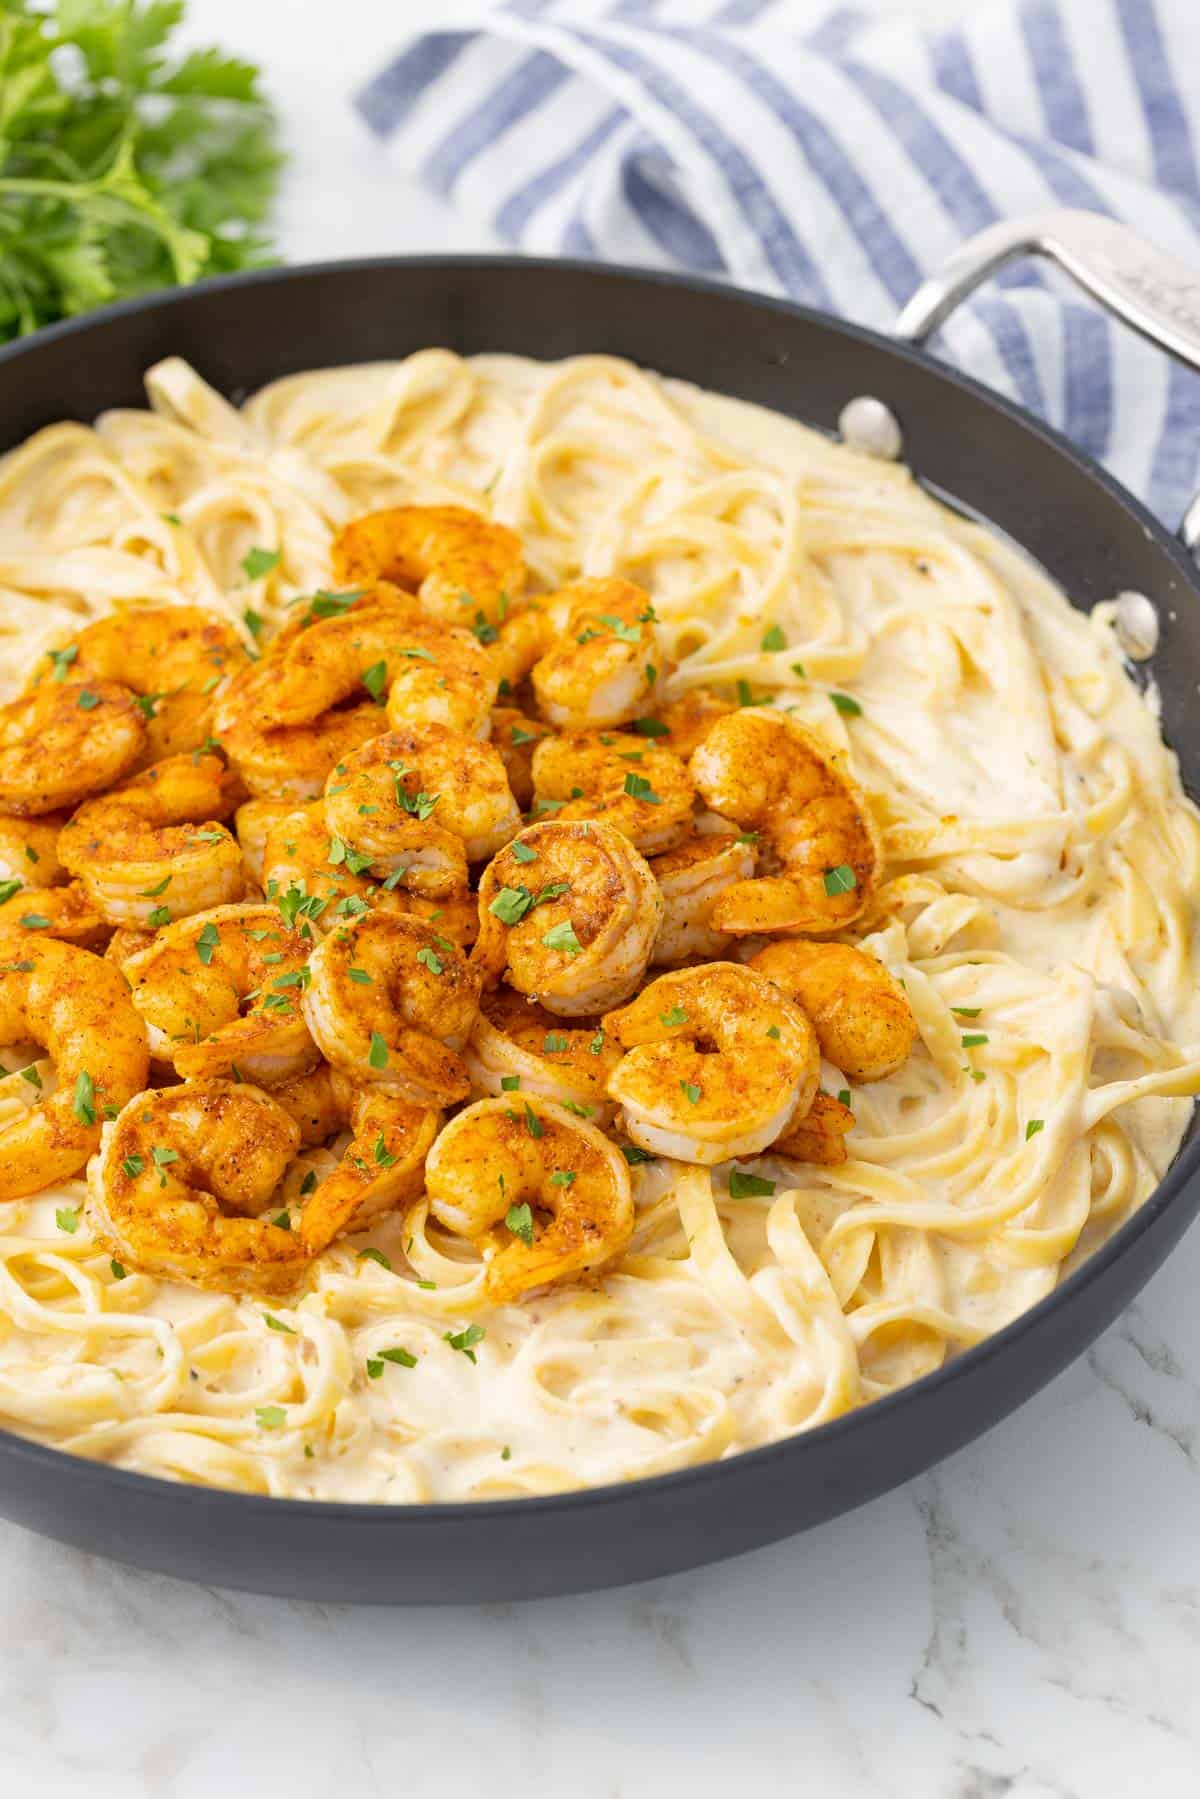 Cajun shrimp alfredo pasta in a skillet beside a blue and white striped kitchen towel.